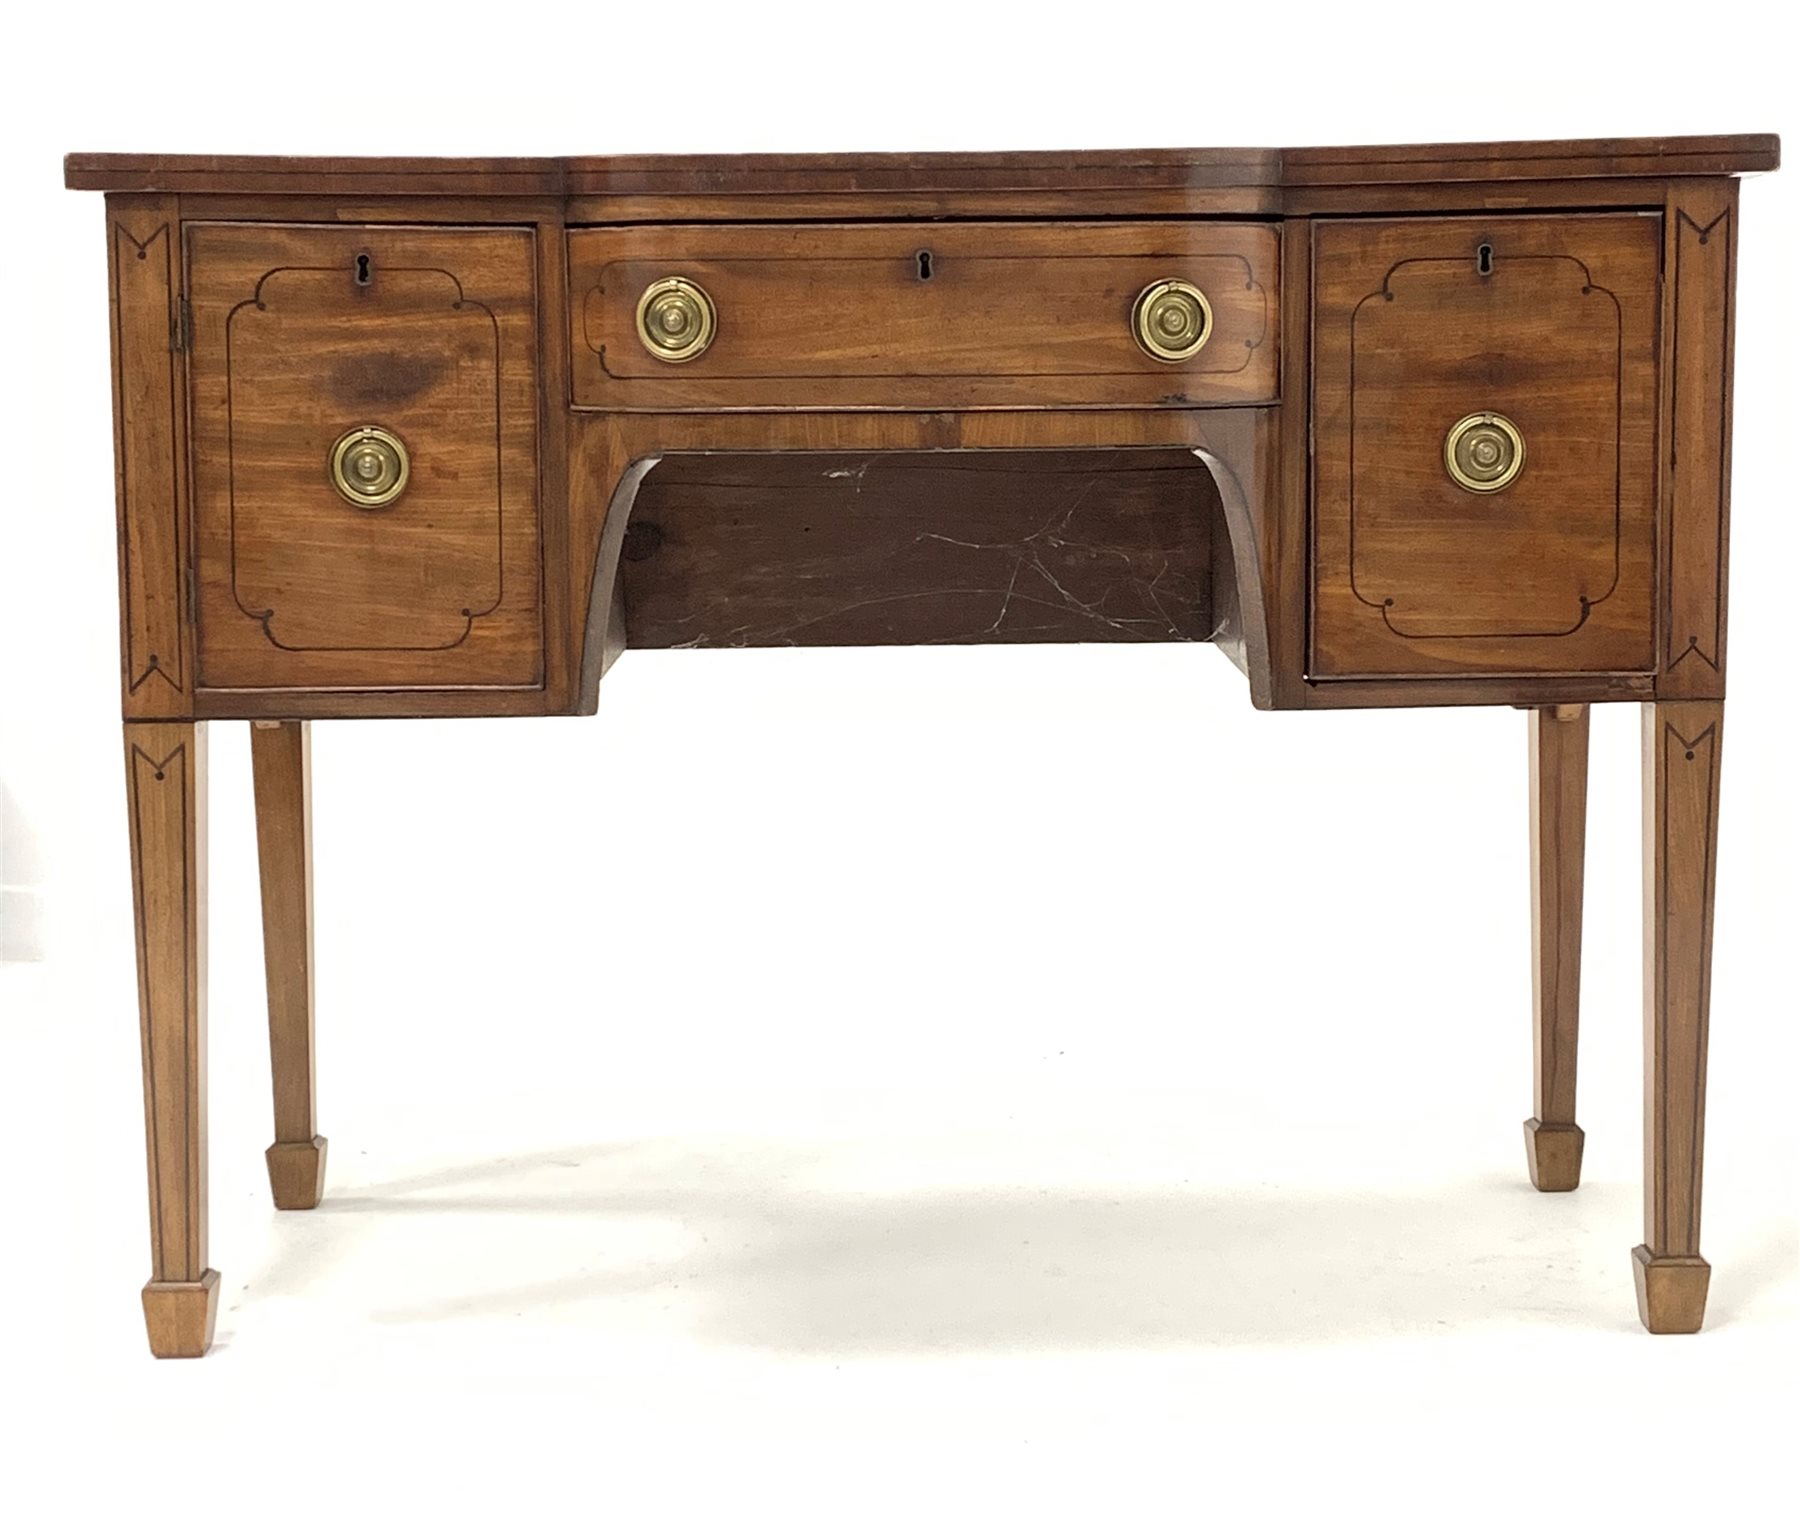 George IV mahogany break bow front sideboard, with ebonised string inlay, two drawers and a cupboard